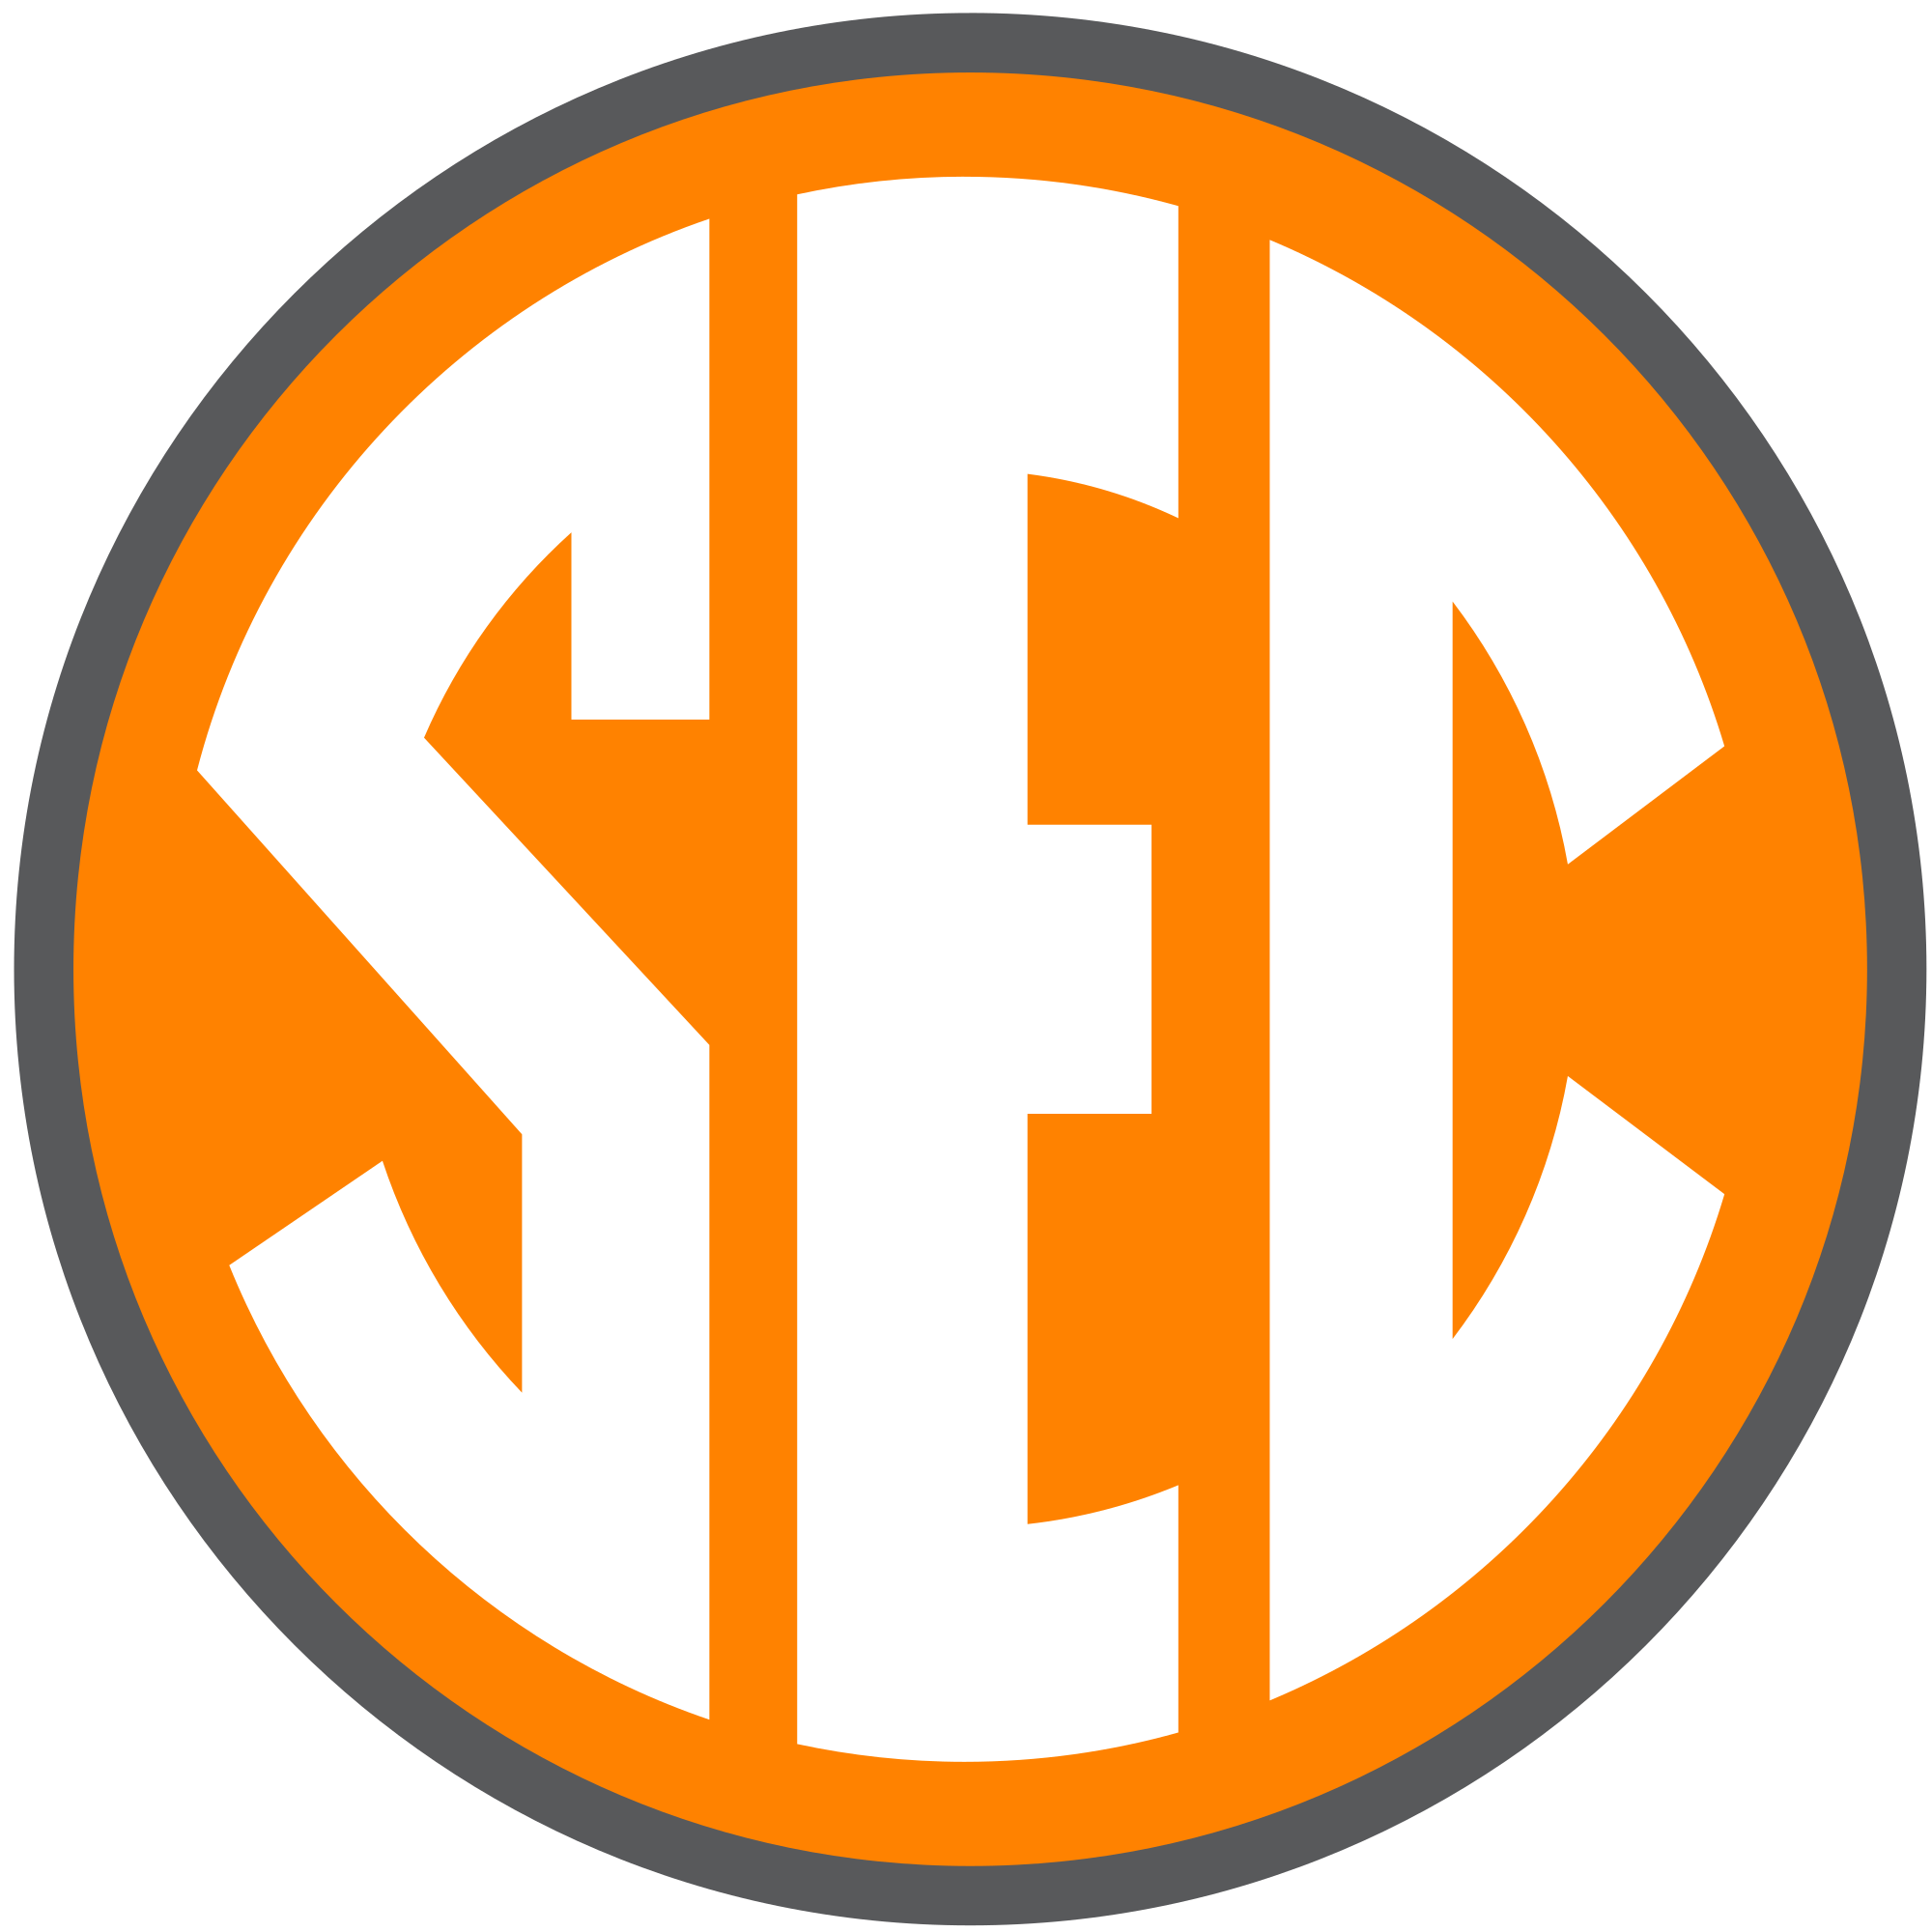 Tennese Logo - File:SEC logo in Tennessee colors.svg - Wikimedia Commons